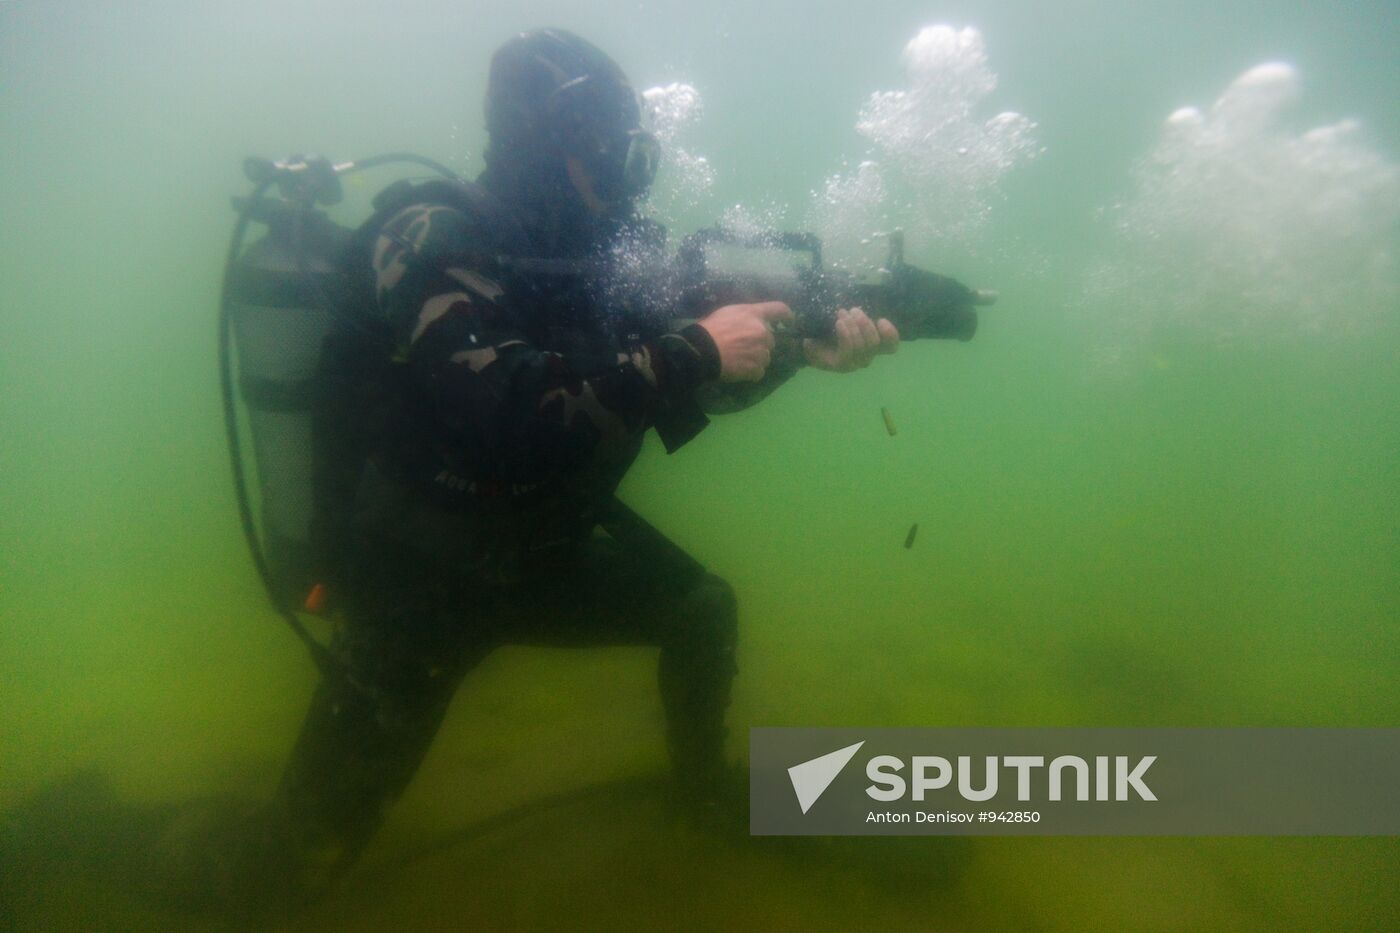 Military divers in training on Lake Baikal